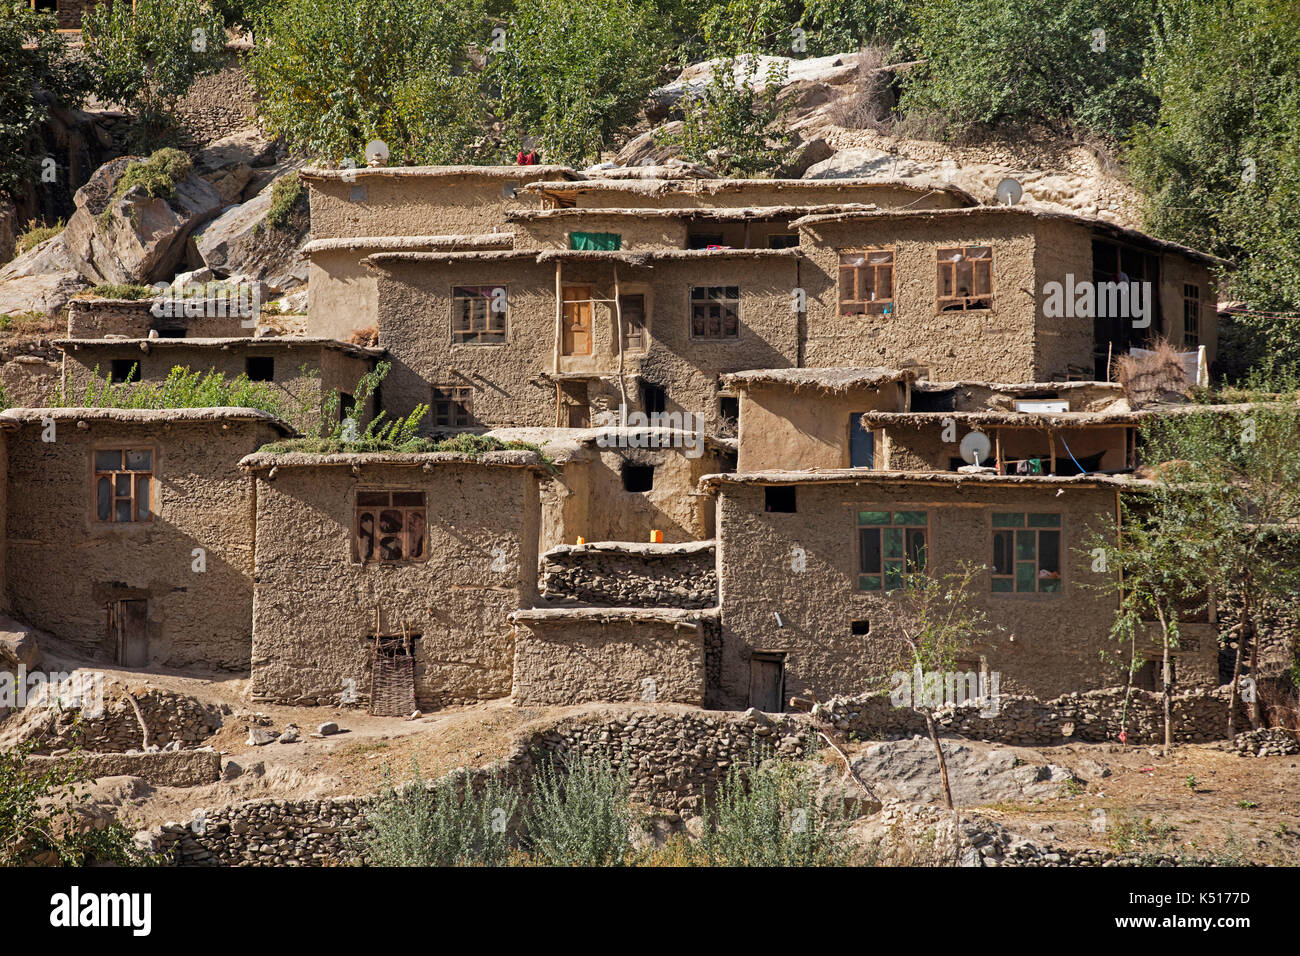 Afghan traditional mud houses in little village in Afghanistan Stock Photo